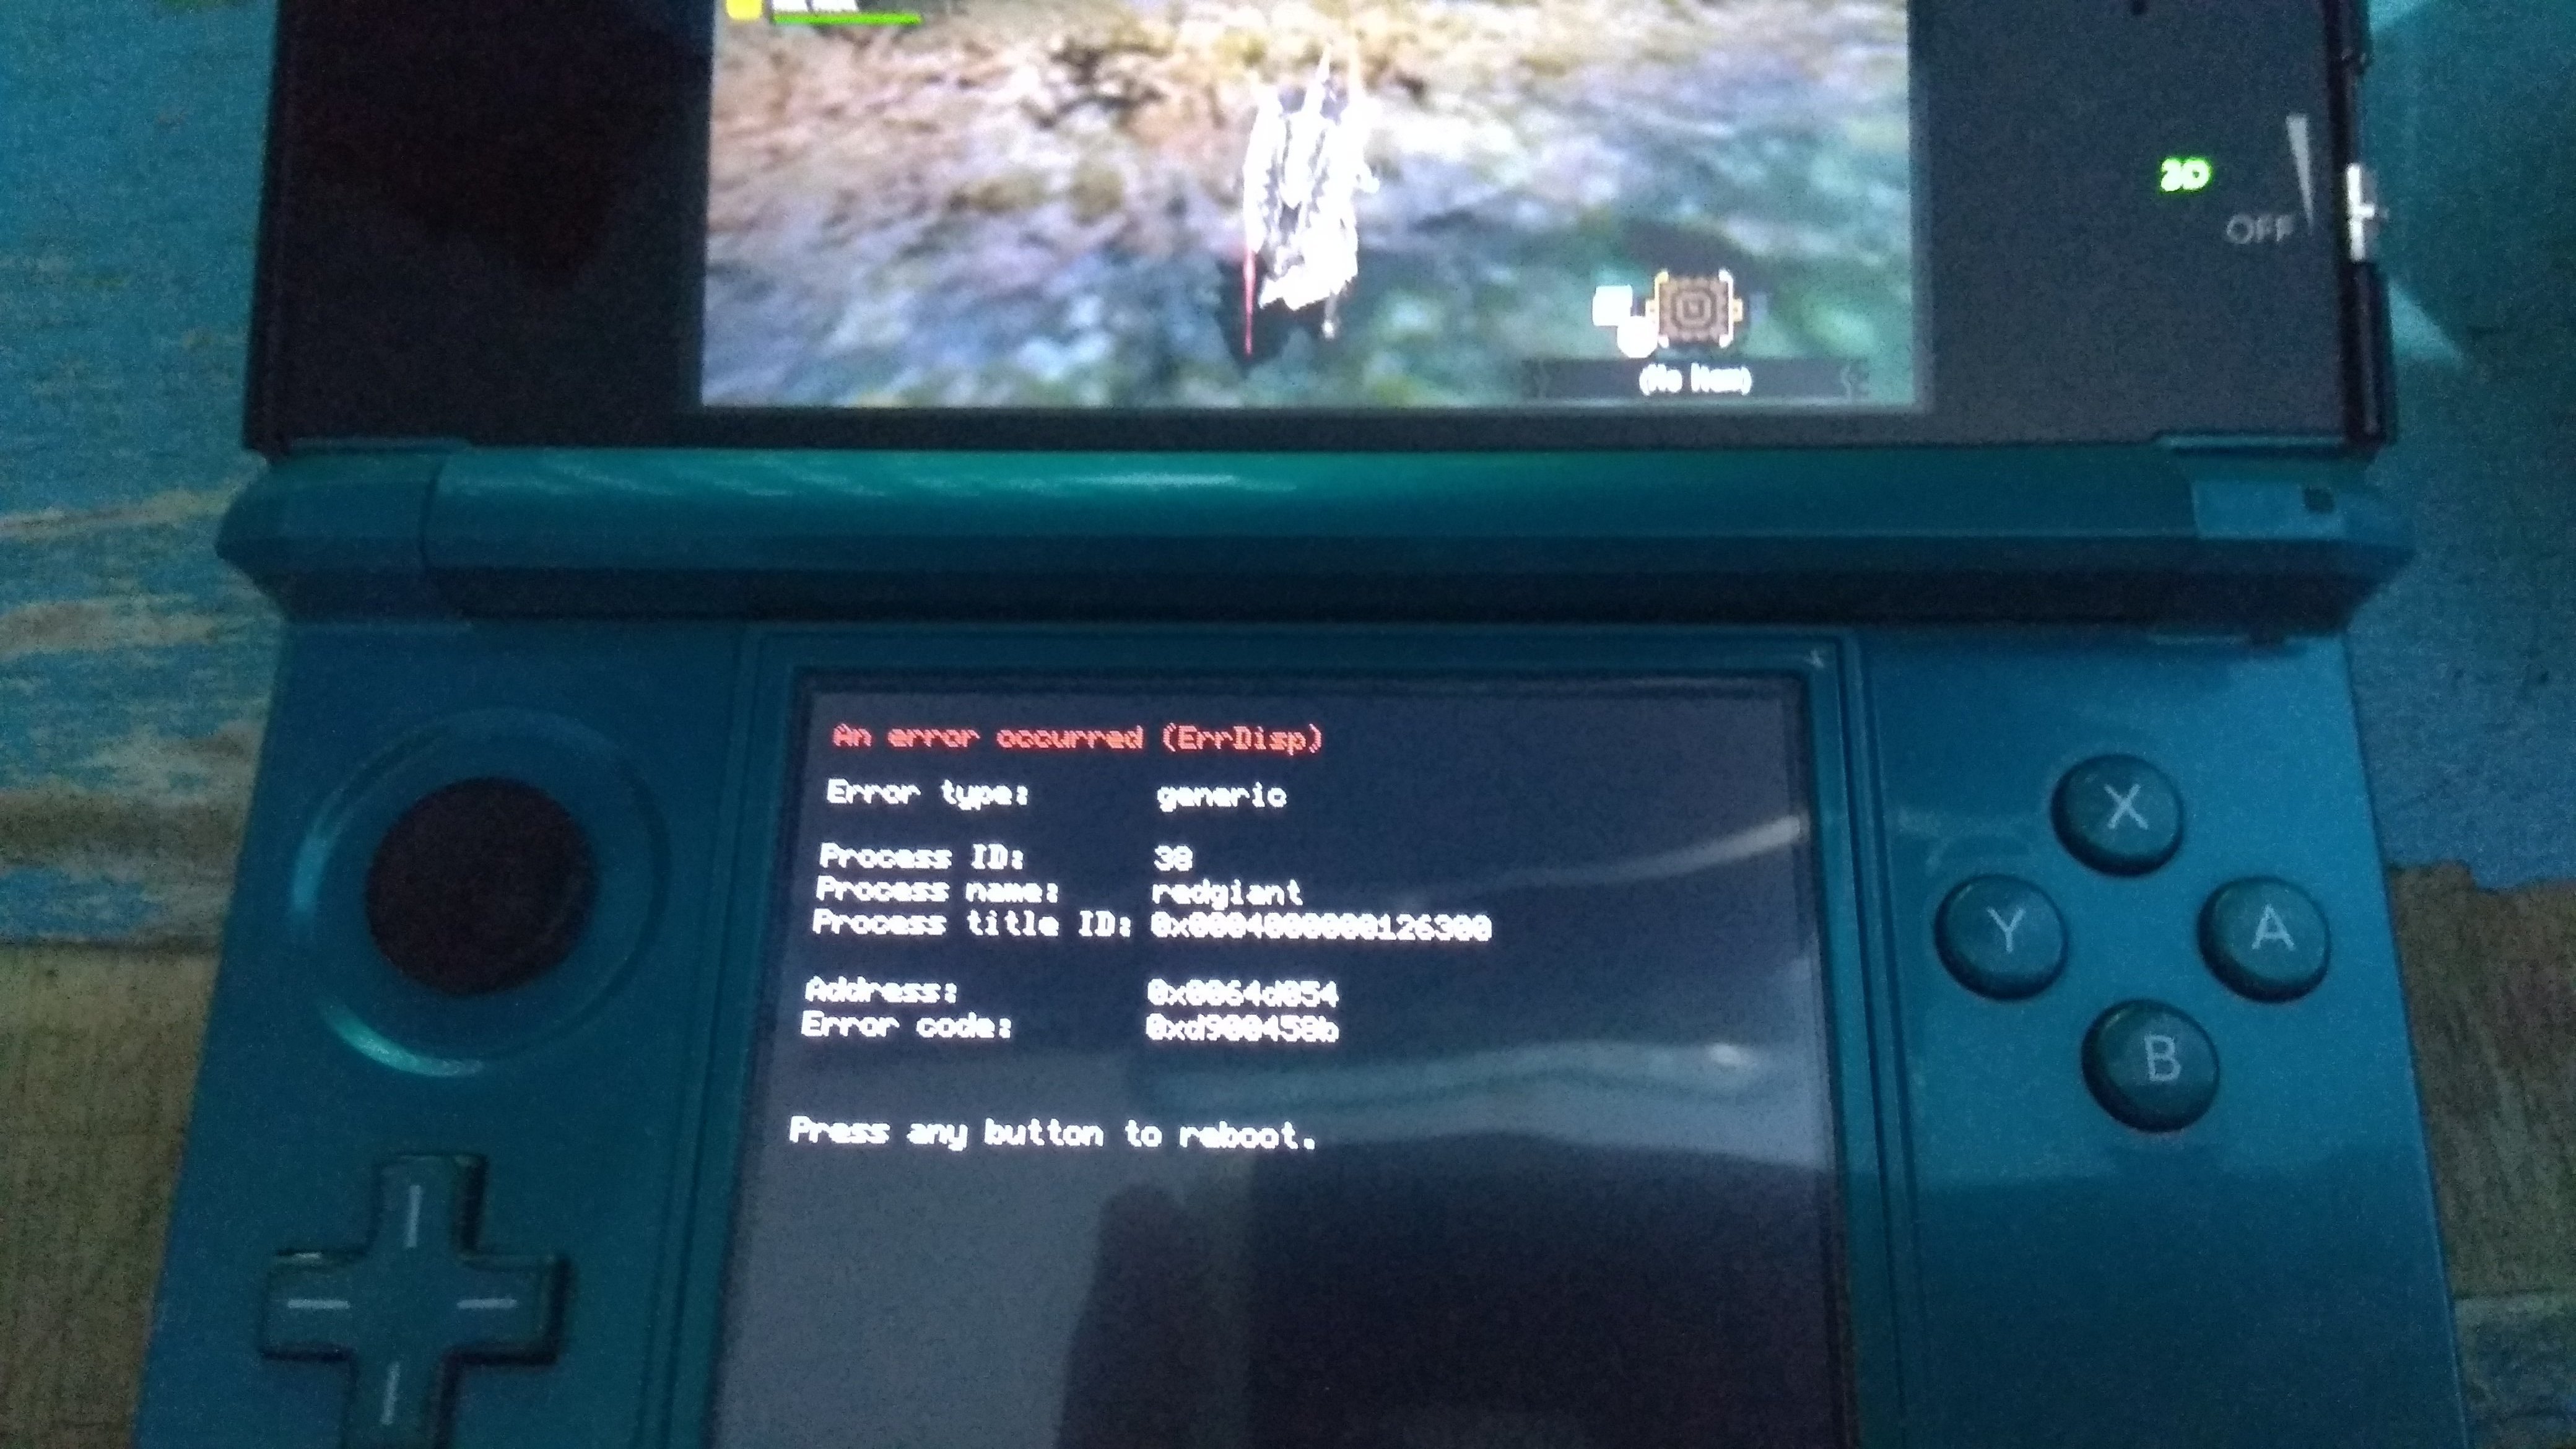 Can I Update My 3ds With Cfw?